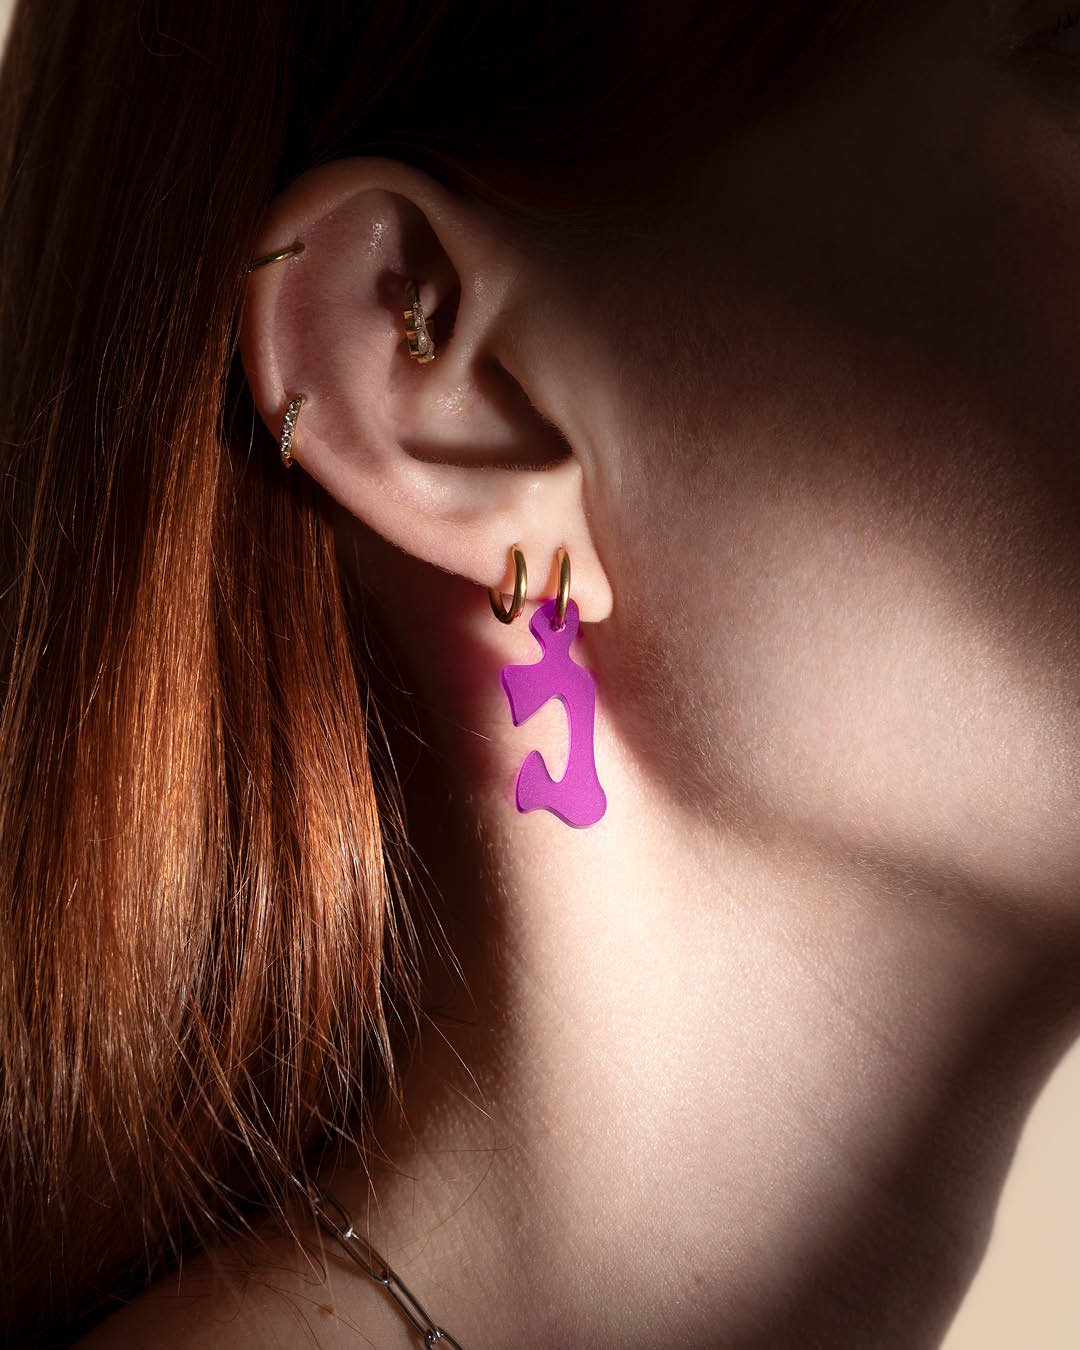 We have added some small earrings to our collection. Great to mix and match or layer with extra jewelry.

Talent: @meghanvanlil 
Photographer: @annieksnoeijs 
Art Direction &amp; Styling: @odine.isa @sanne_bouman 

#ossistudio #prettyinpink #sustaina